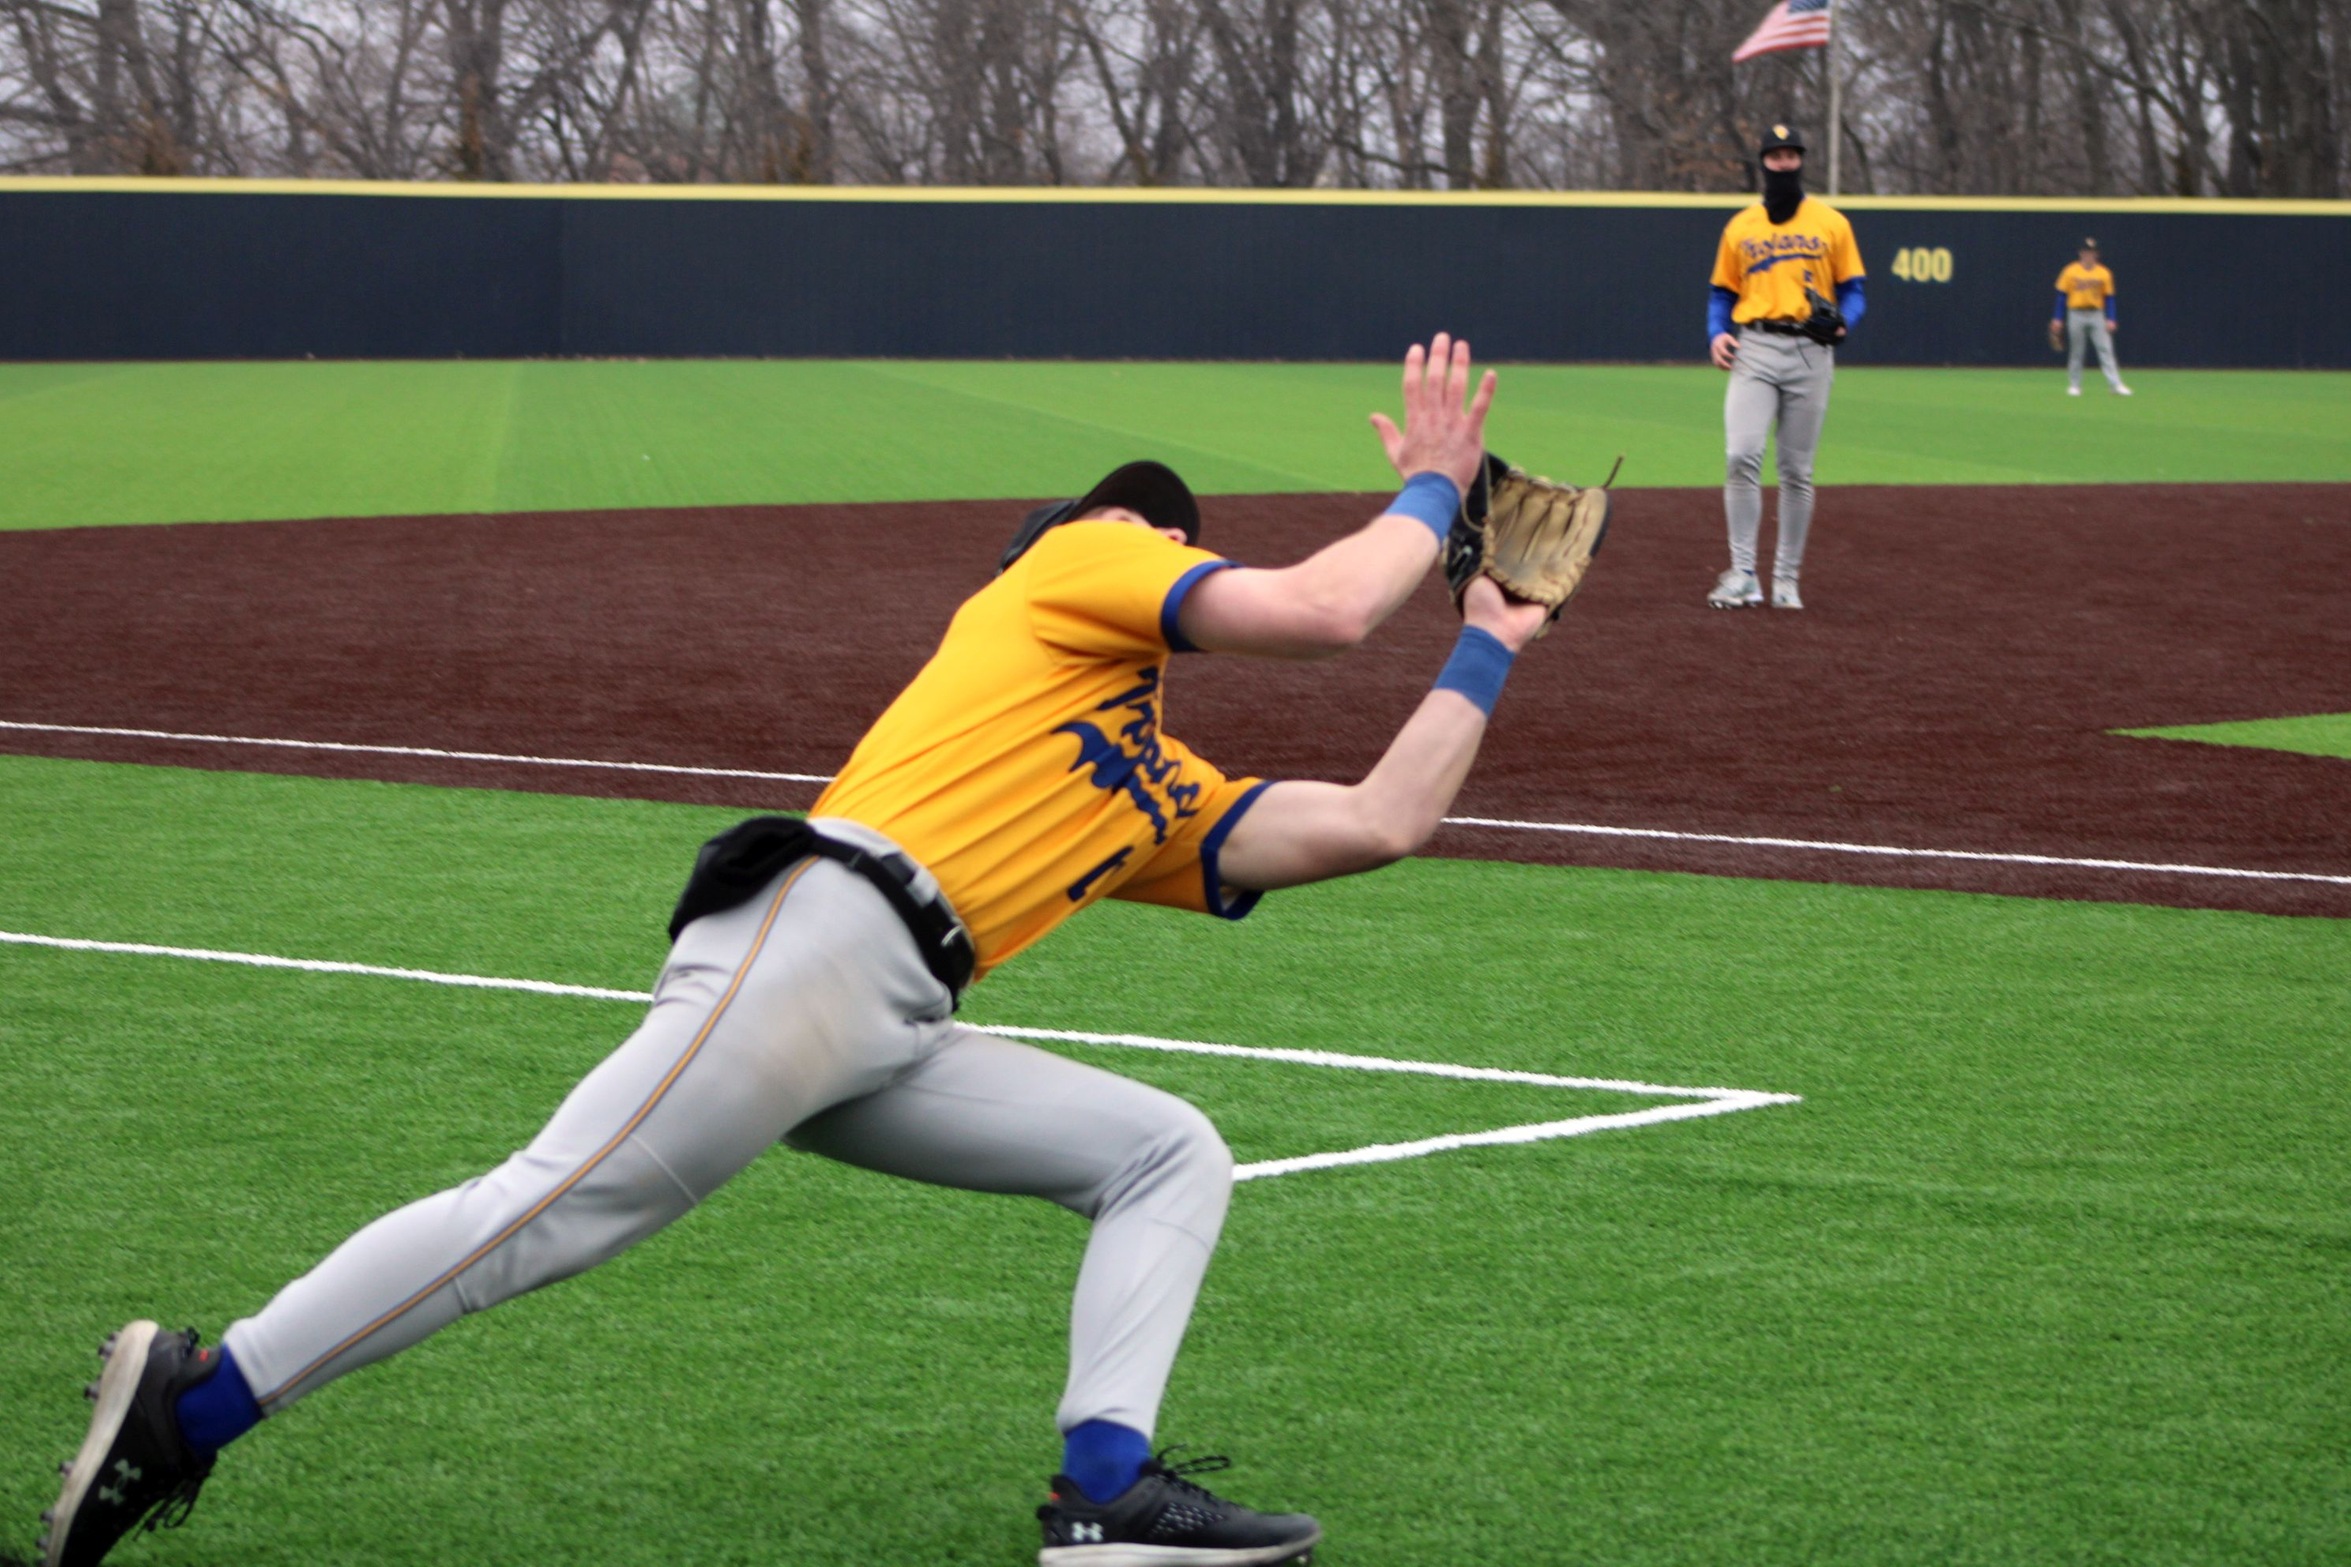 NIACC third baseman Colin Evers catches a pop fly in foul territory in the second game of Sunday's doubleheader against Johnson County CC.